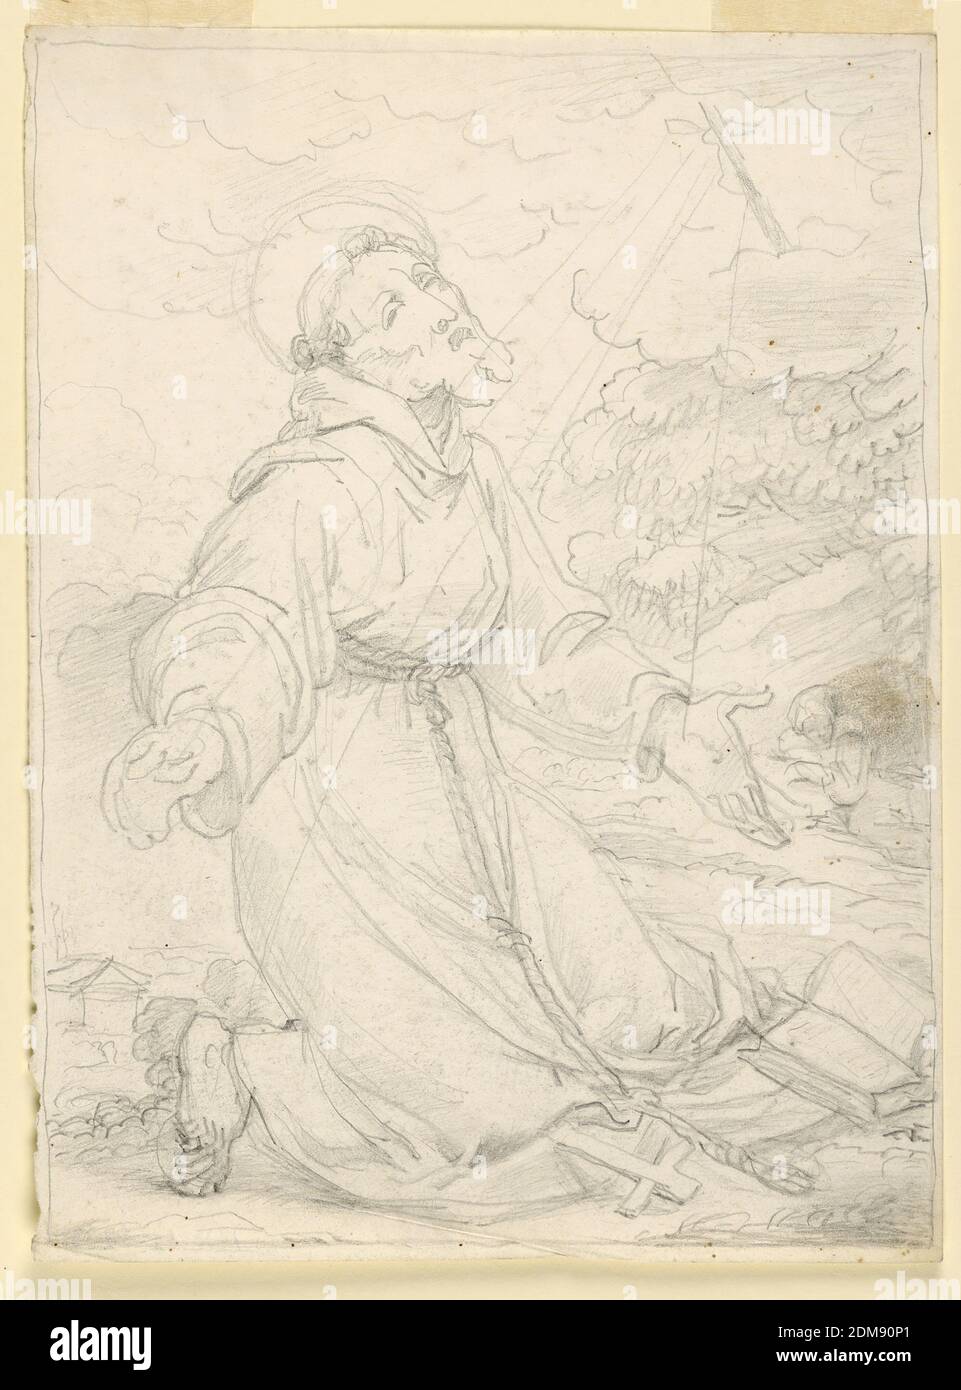 Saint Francis Receiving the Stigmata, Fortunato Duranti, Italian, 1787 - 1863, Graphite on paper, Kneeling toward the right. The friar is in the middle ground at right. Framing graphite line. Parts of outline are deeply impressed., Rome, Italy, 1820–1850, Drawing Stock Photo